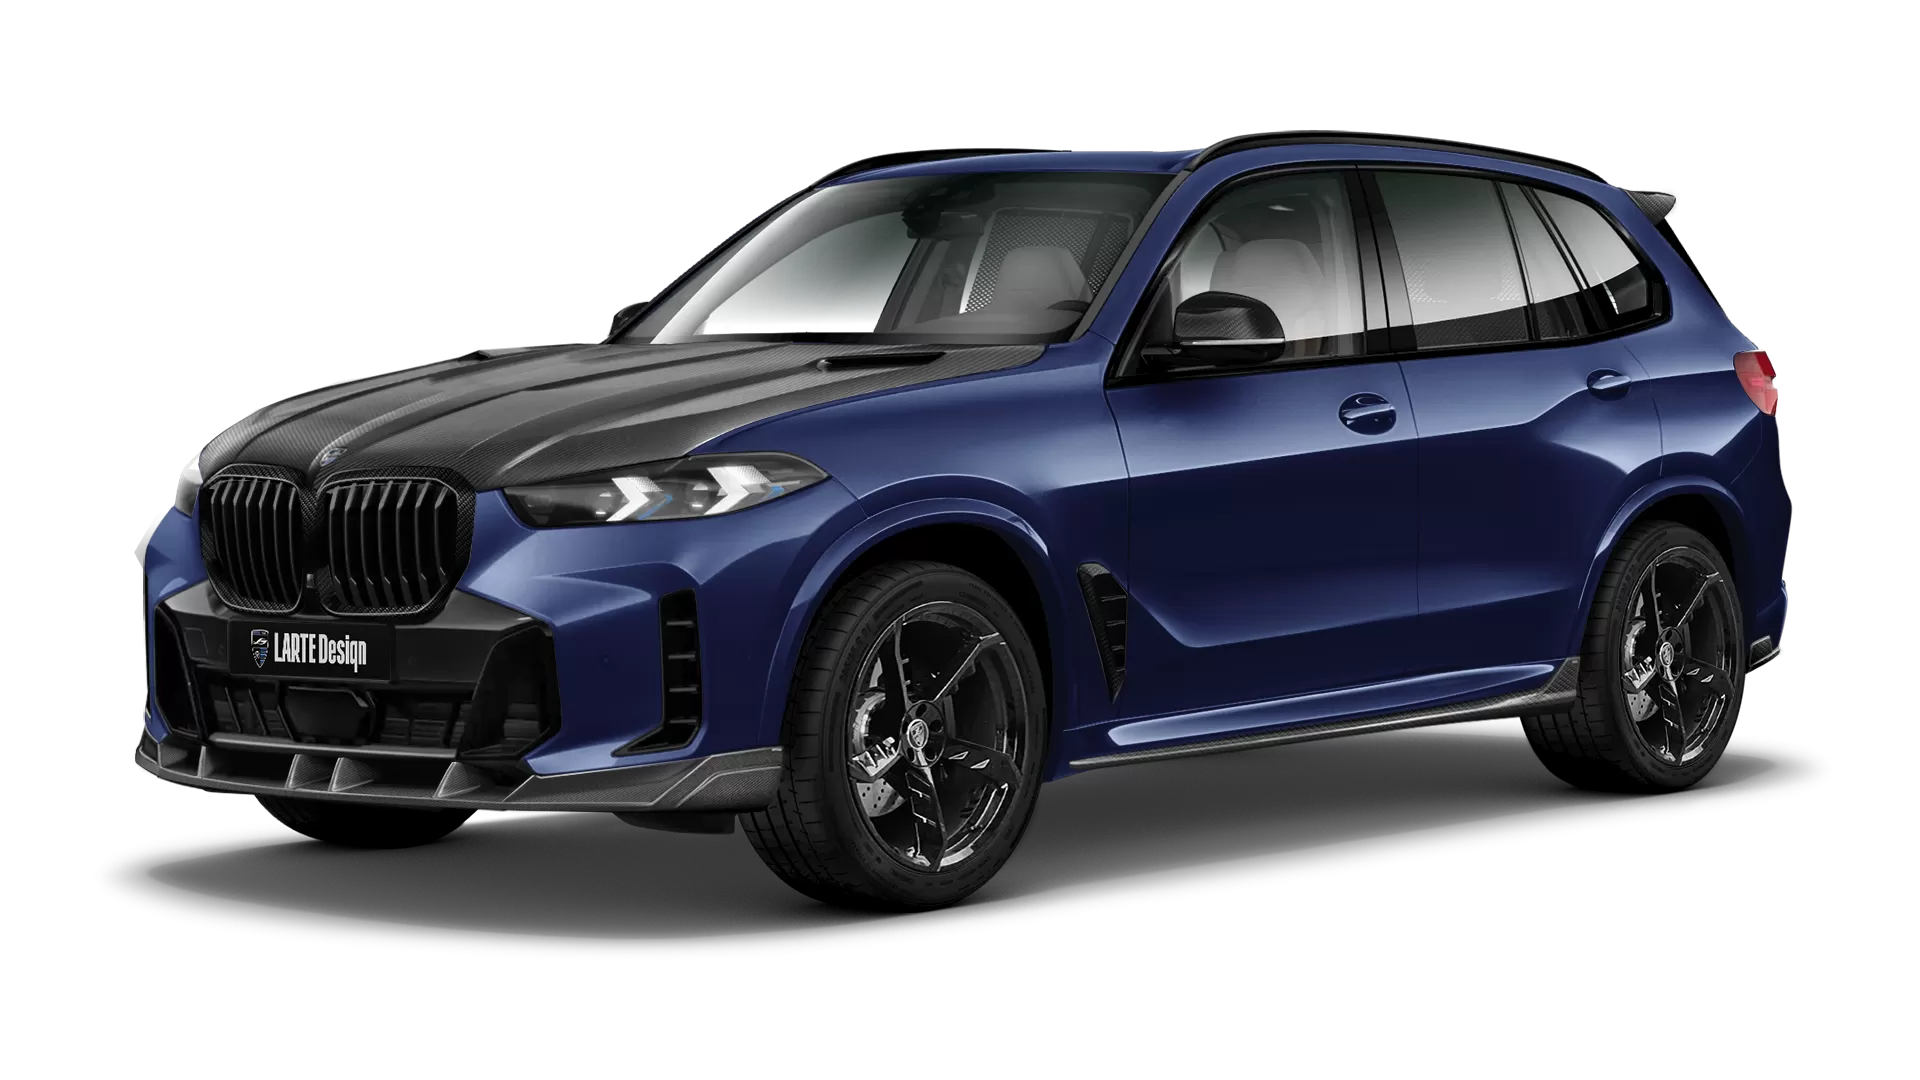 BMW X5 G05 LCI Facelift with carbon body kit: front view shown in Tanzanite Blue